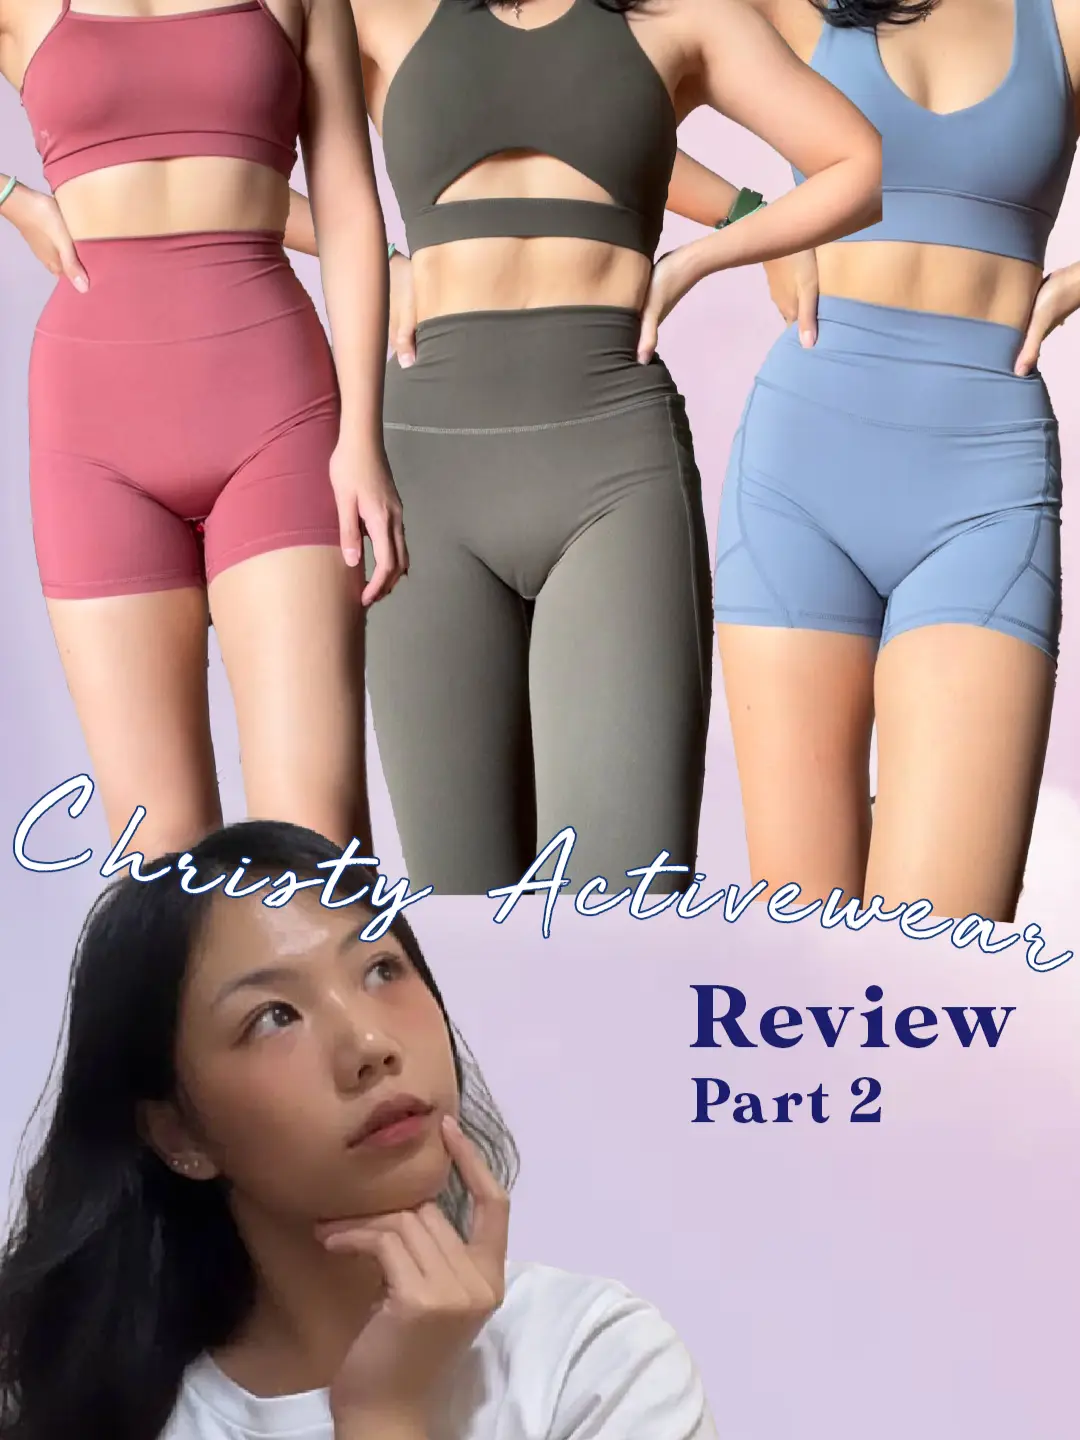 Christy Activewear review part 2, Gallery posted by Elibirb